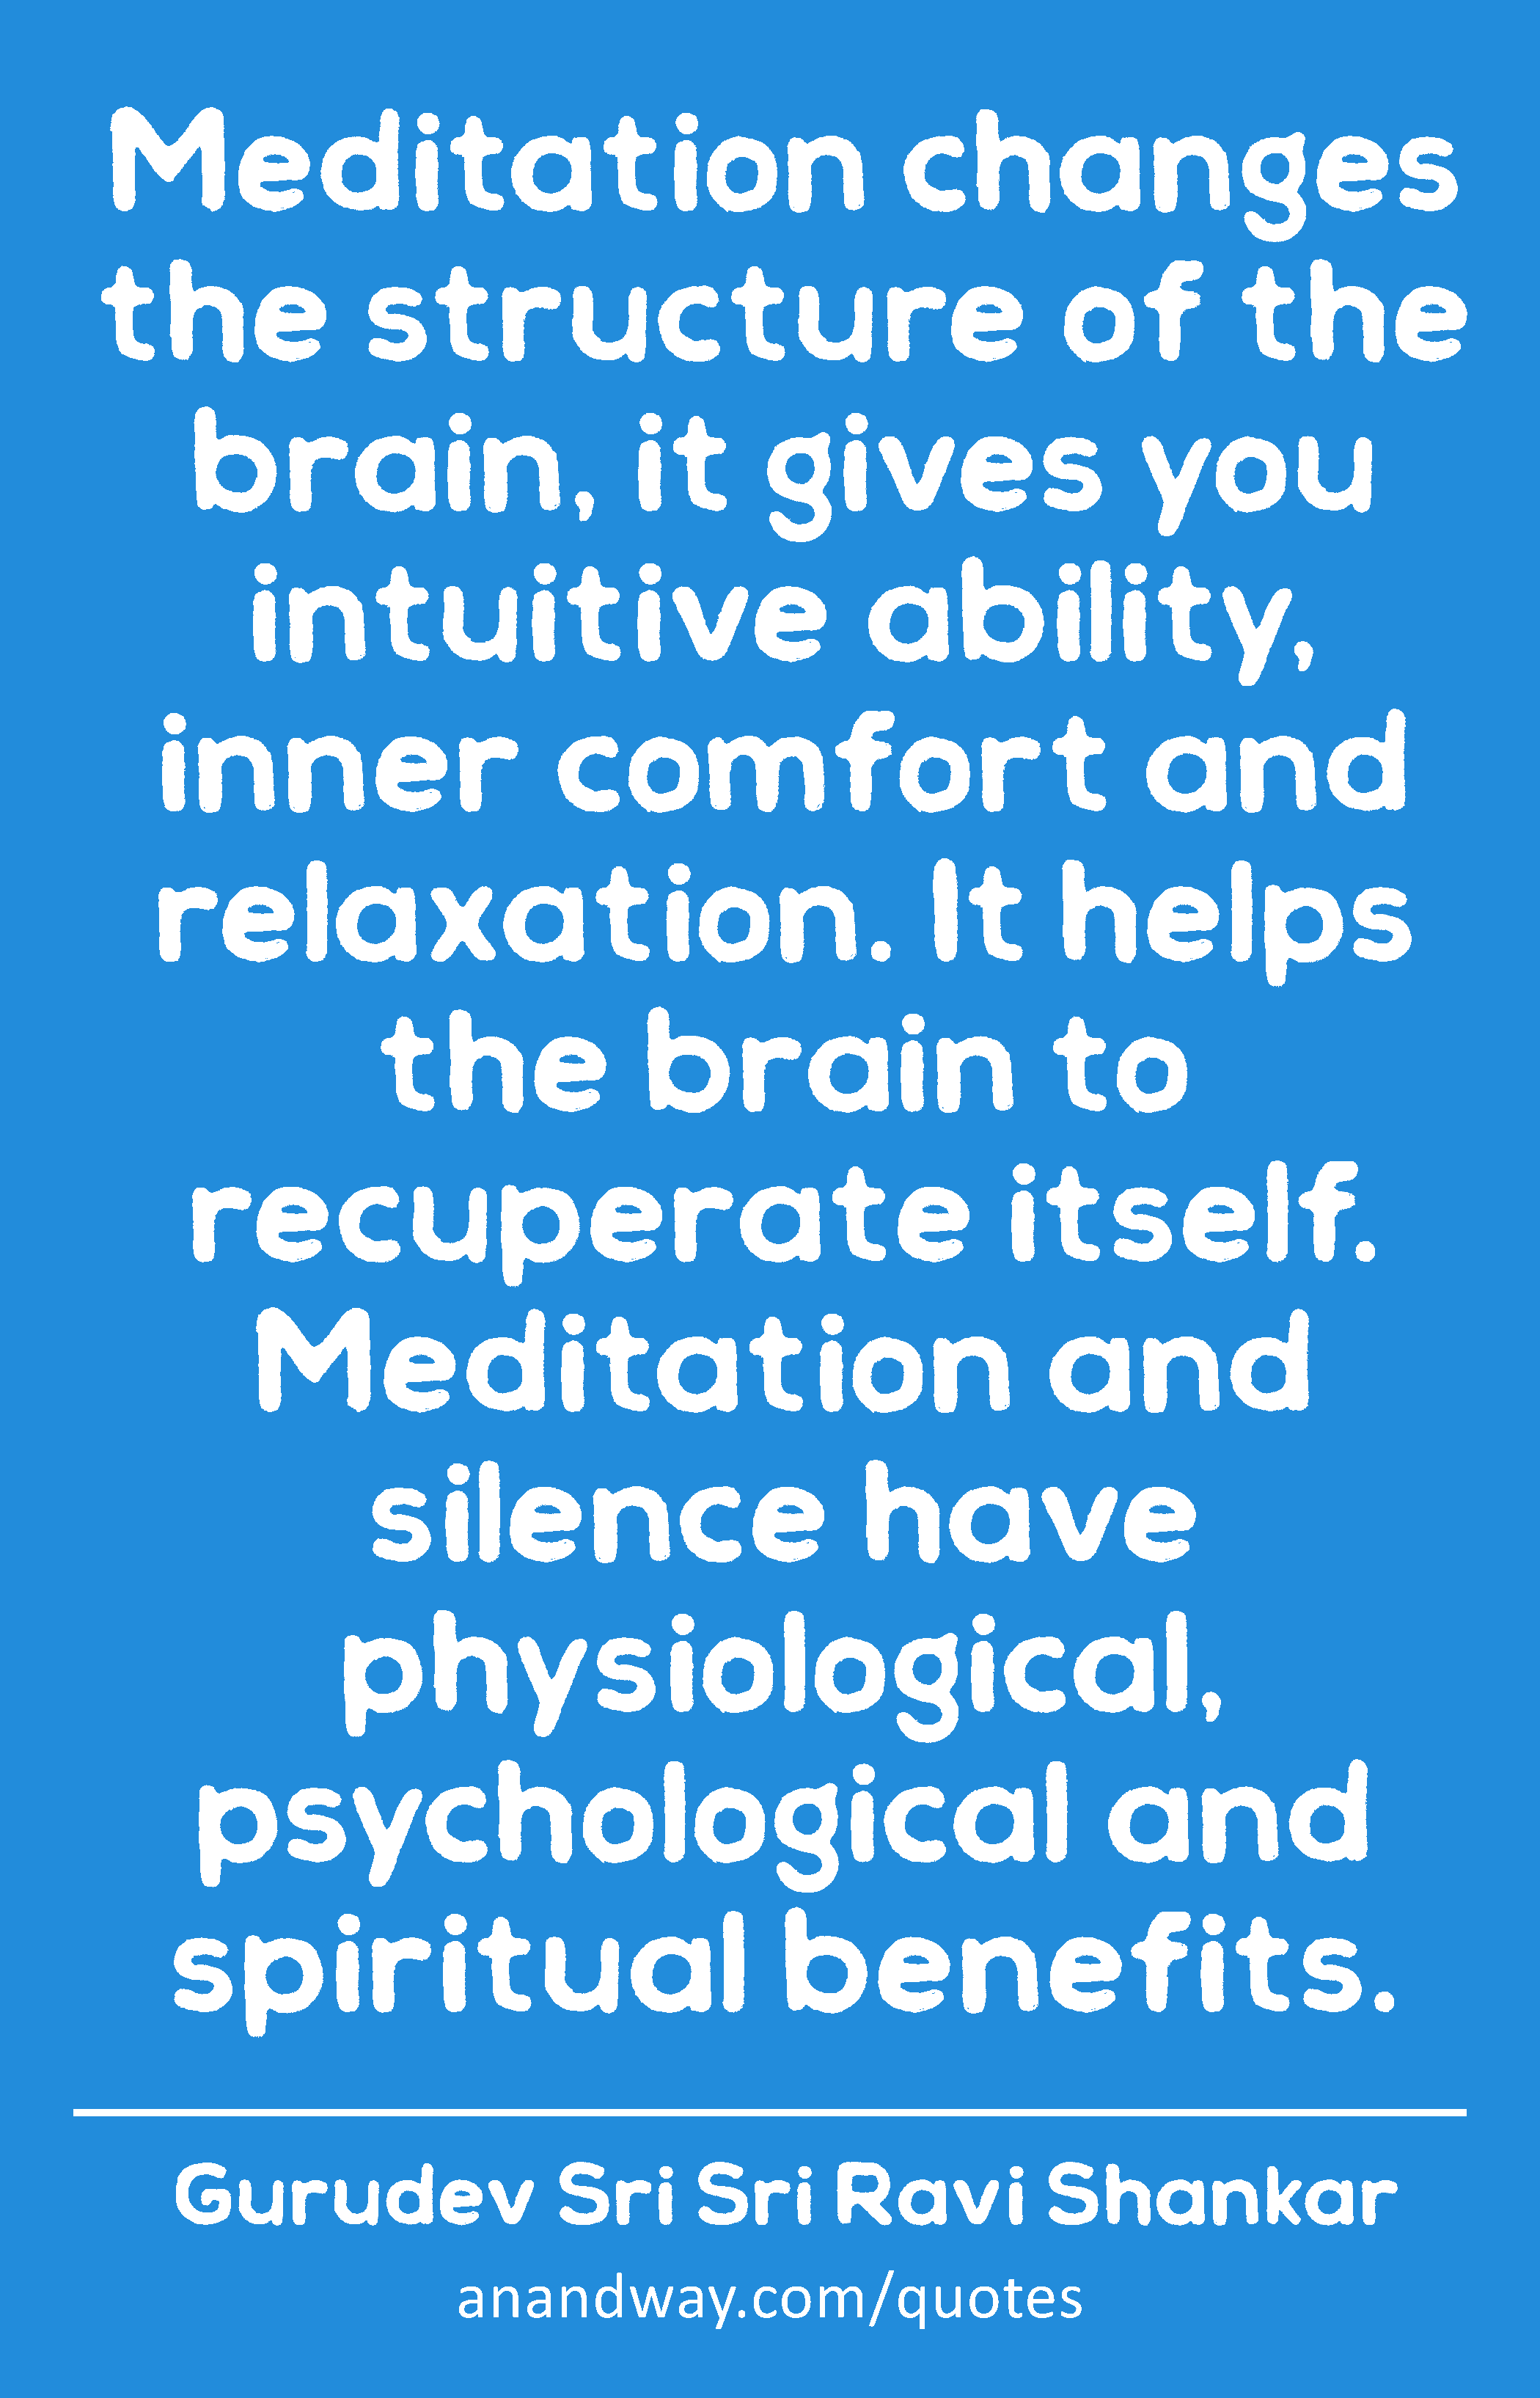 Meditation changes the structure of the brain, it gives you intuitive ability, inner comfort and
 -Gurudev Sri Sri Ravi Shankar